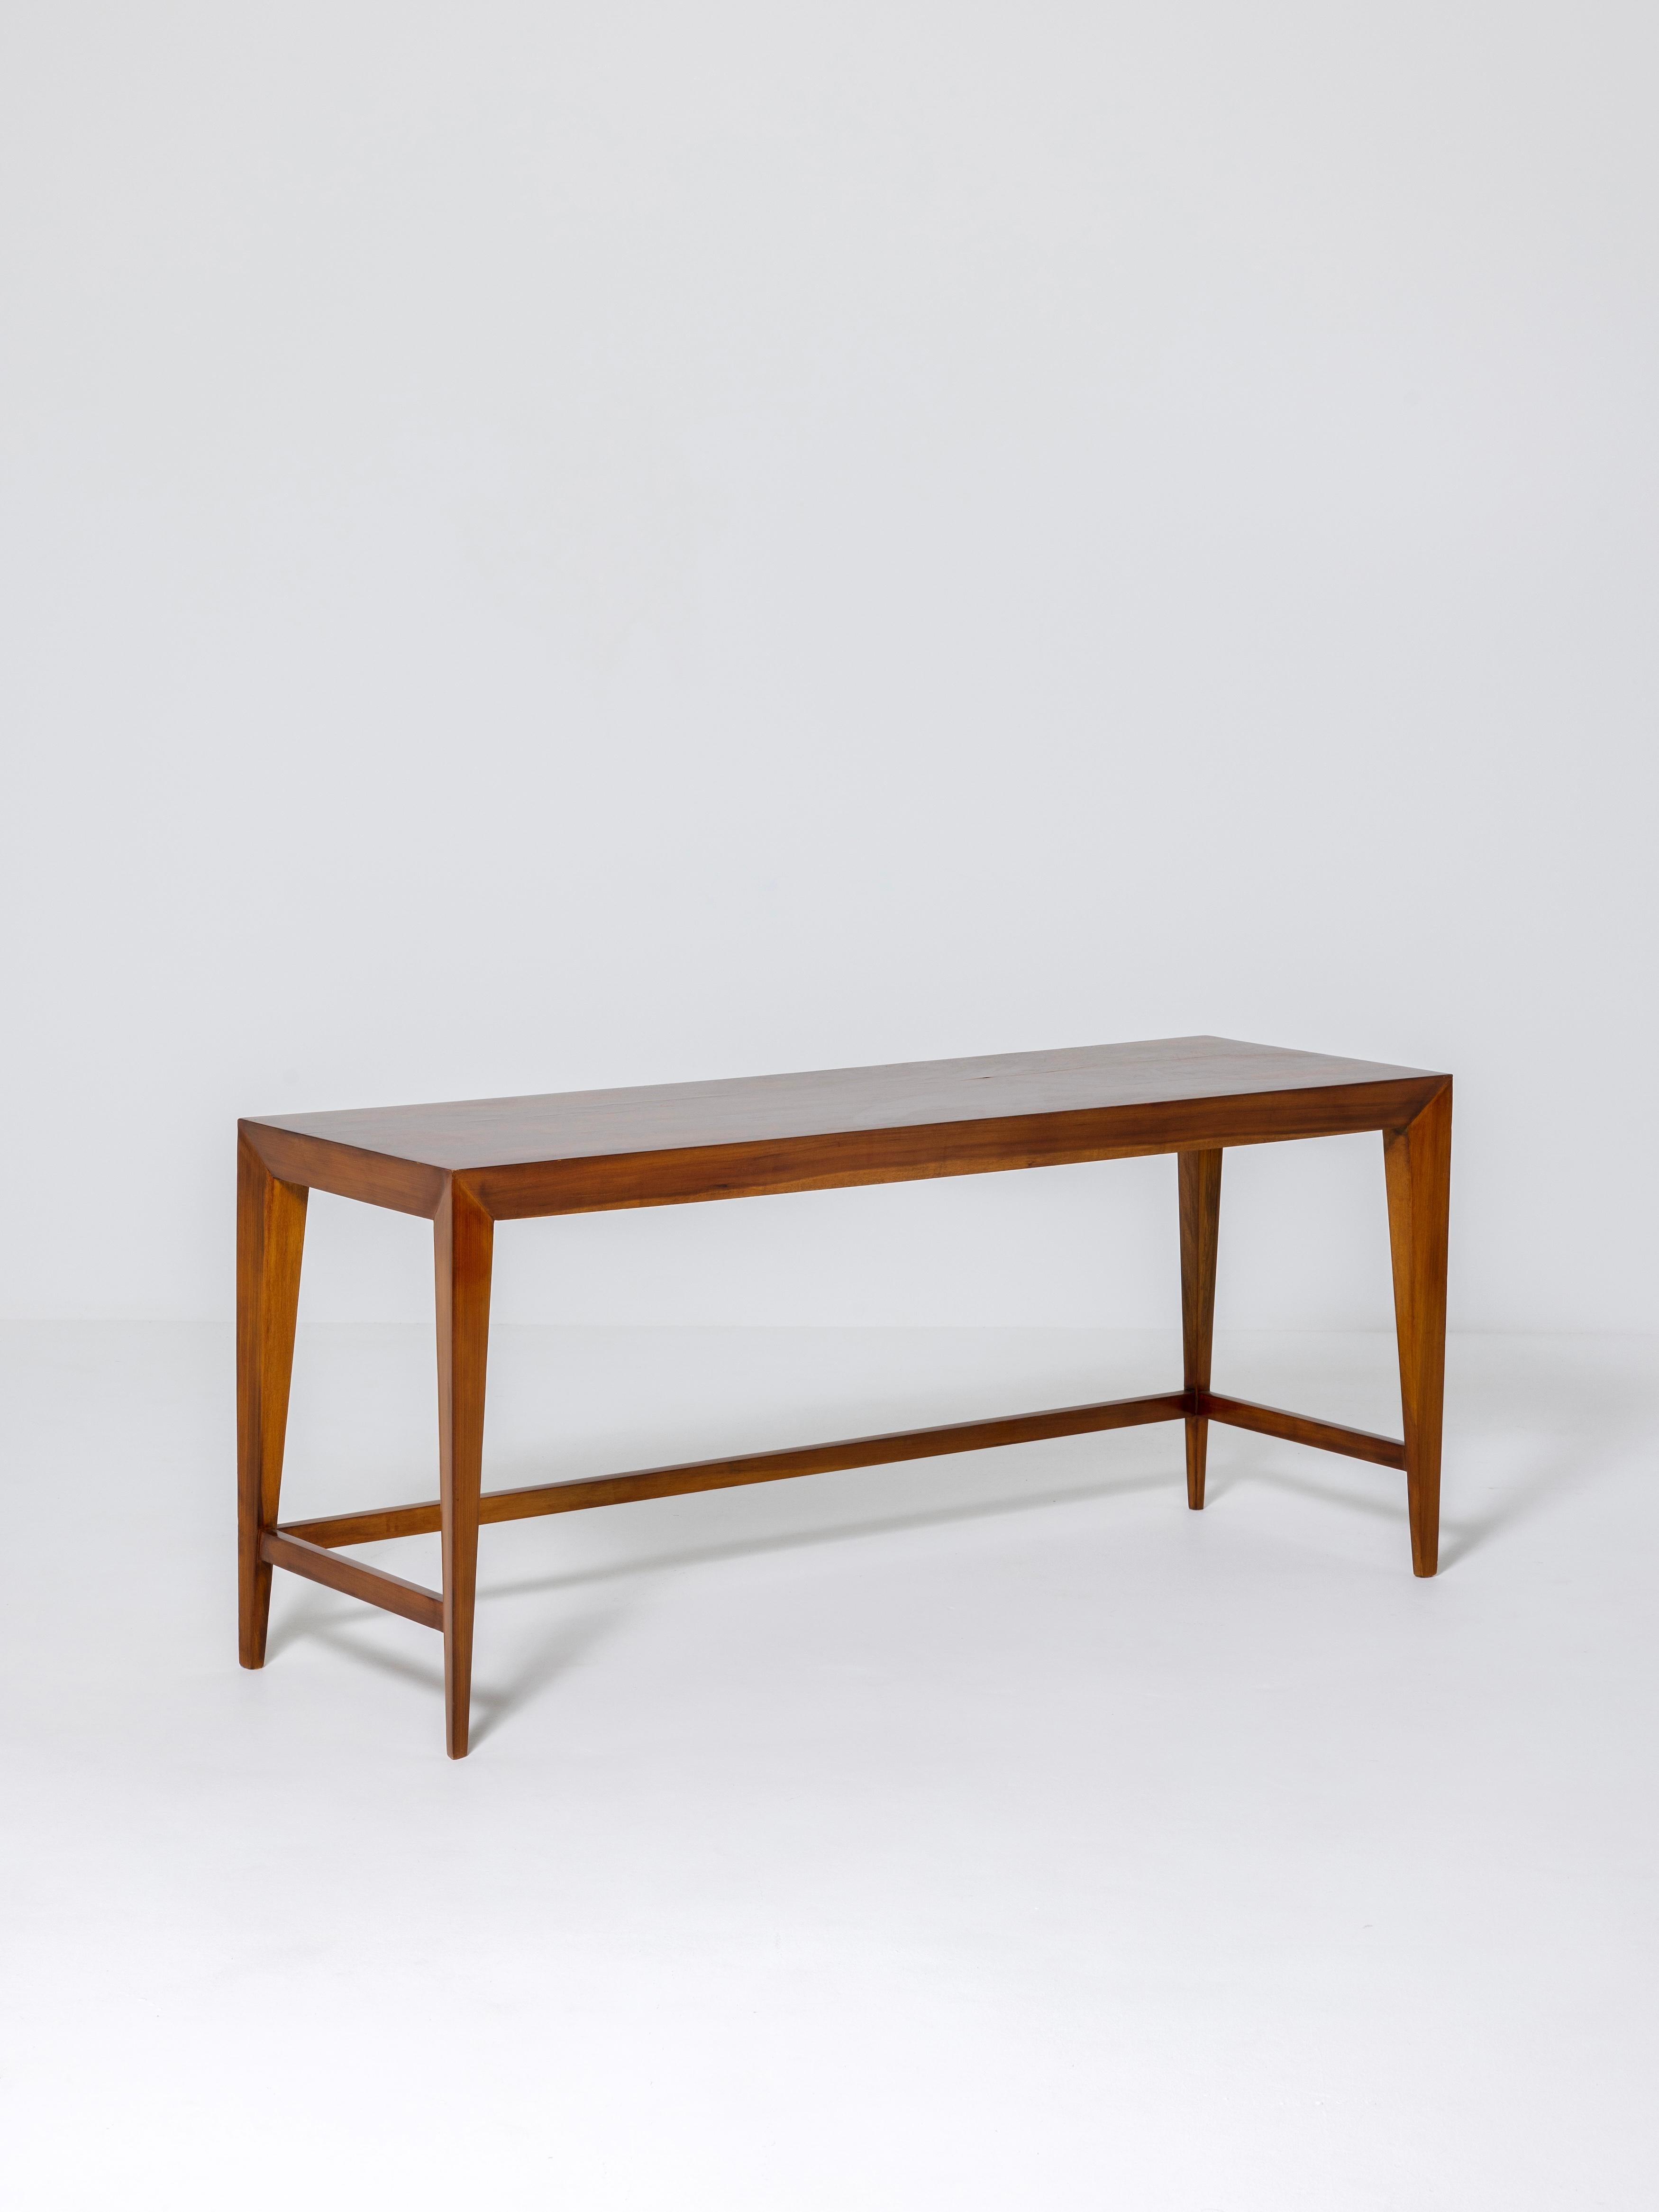 Varnished 1950’s Walnut Wood Console by Silvio Cavatorta, Italy For Sale